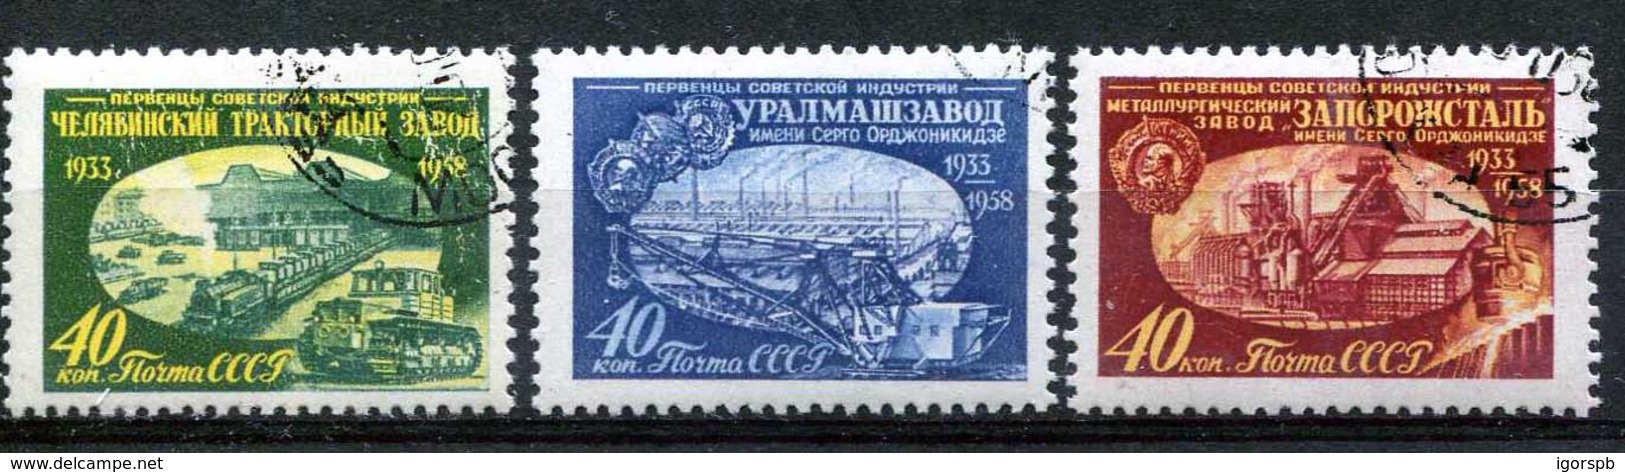 Russia , SG 2276-8,1958,25th Anniv Of Industrial Plants,single,cancelled - Used Stamps